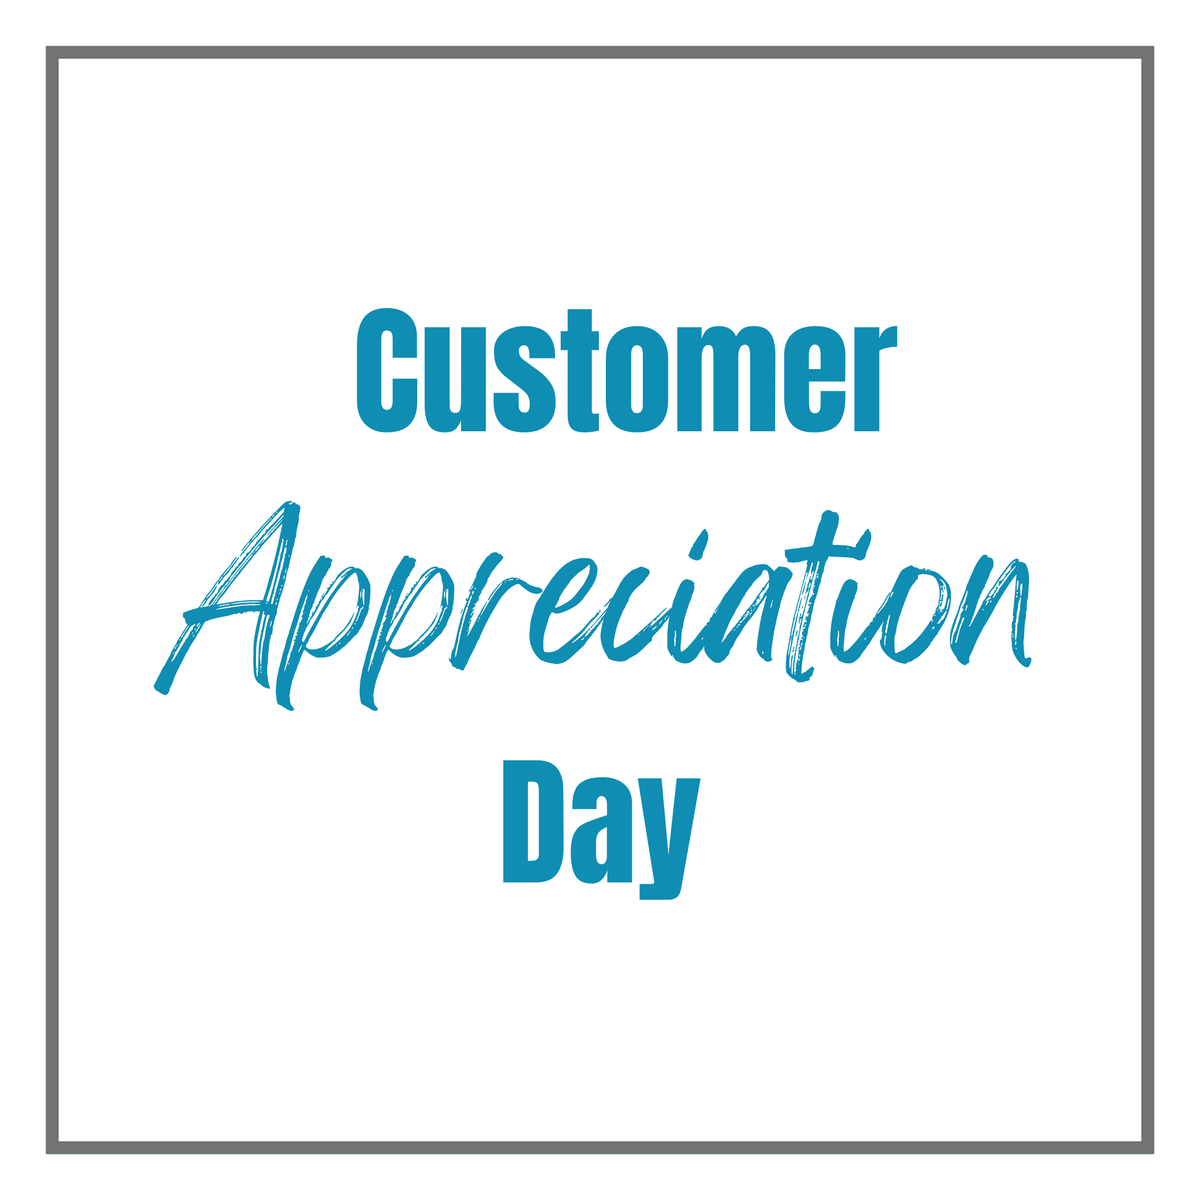 🌟 Happy Customer Appreciation Day! 🌟

To our wonderful customers, thank you for your continued support and trust. We appreciate you today and every day! #CustomerAppreciationDay #CustomerFirst